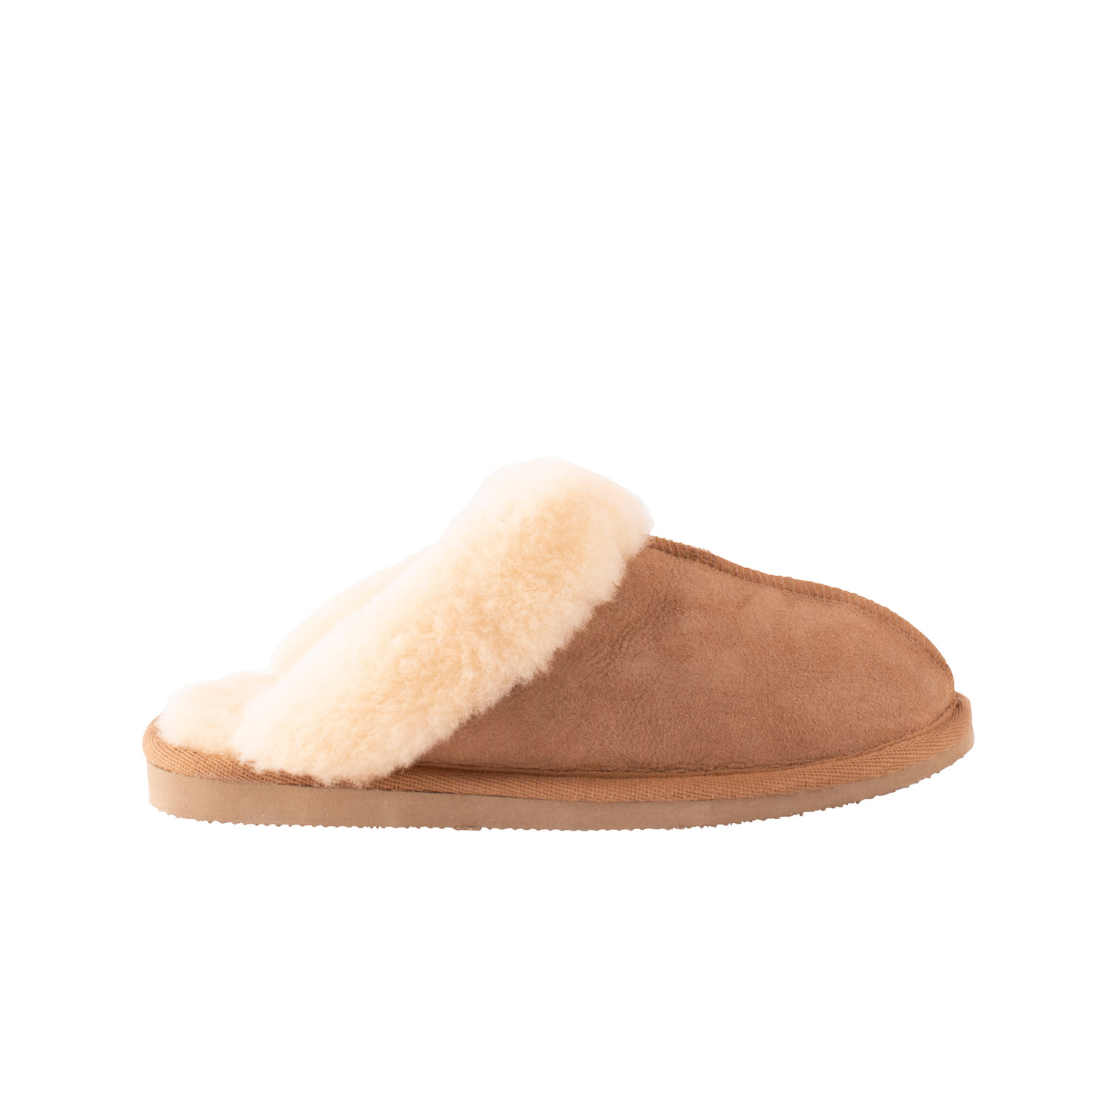 Shepherd of Sweden slippers Jessica chestnut available to buy new from our UK store.  Seen here as a single slipper